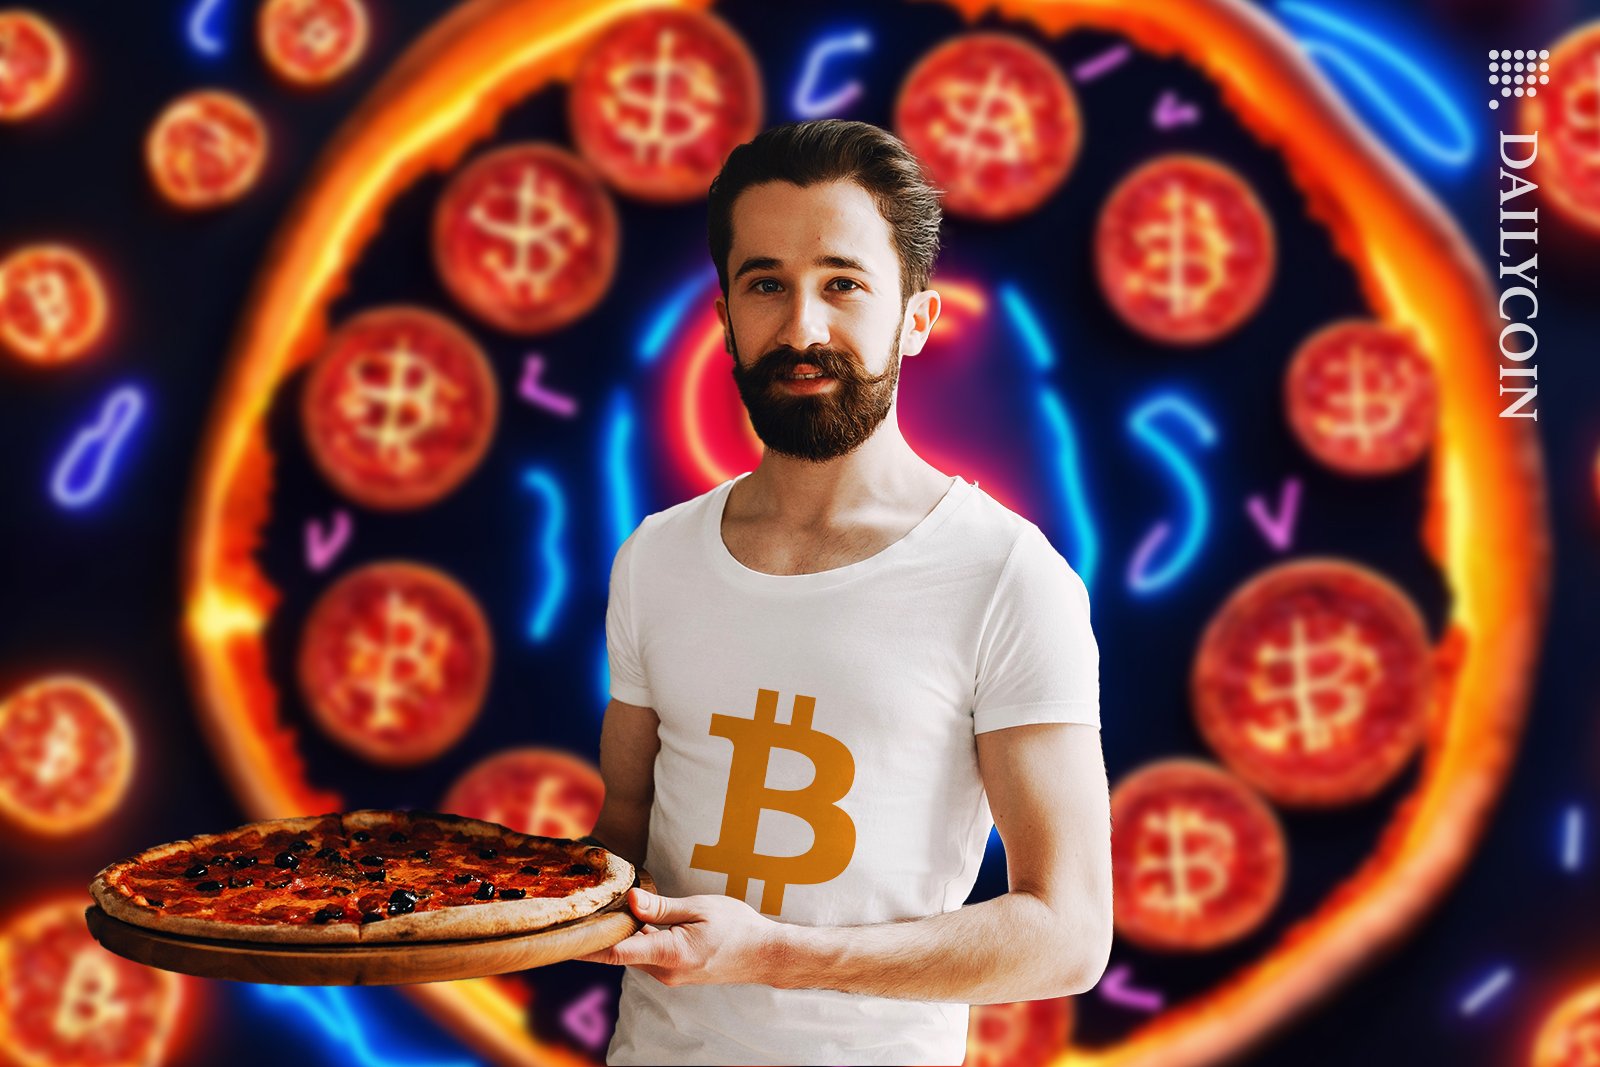 Guy with a pizza, wearing a bitcoin t shirt.